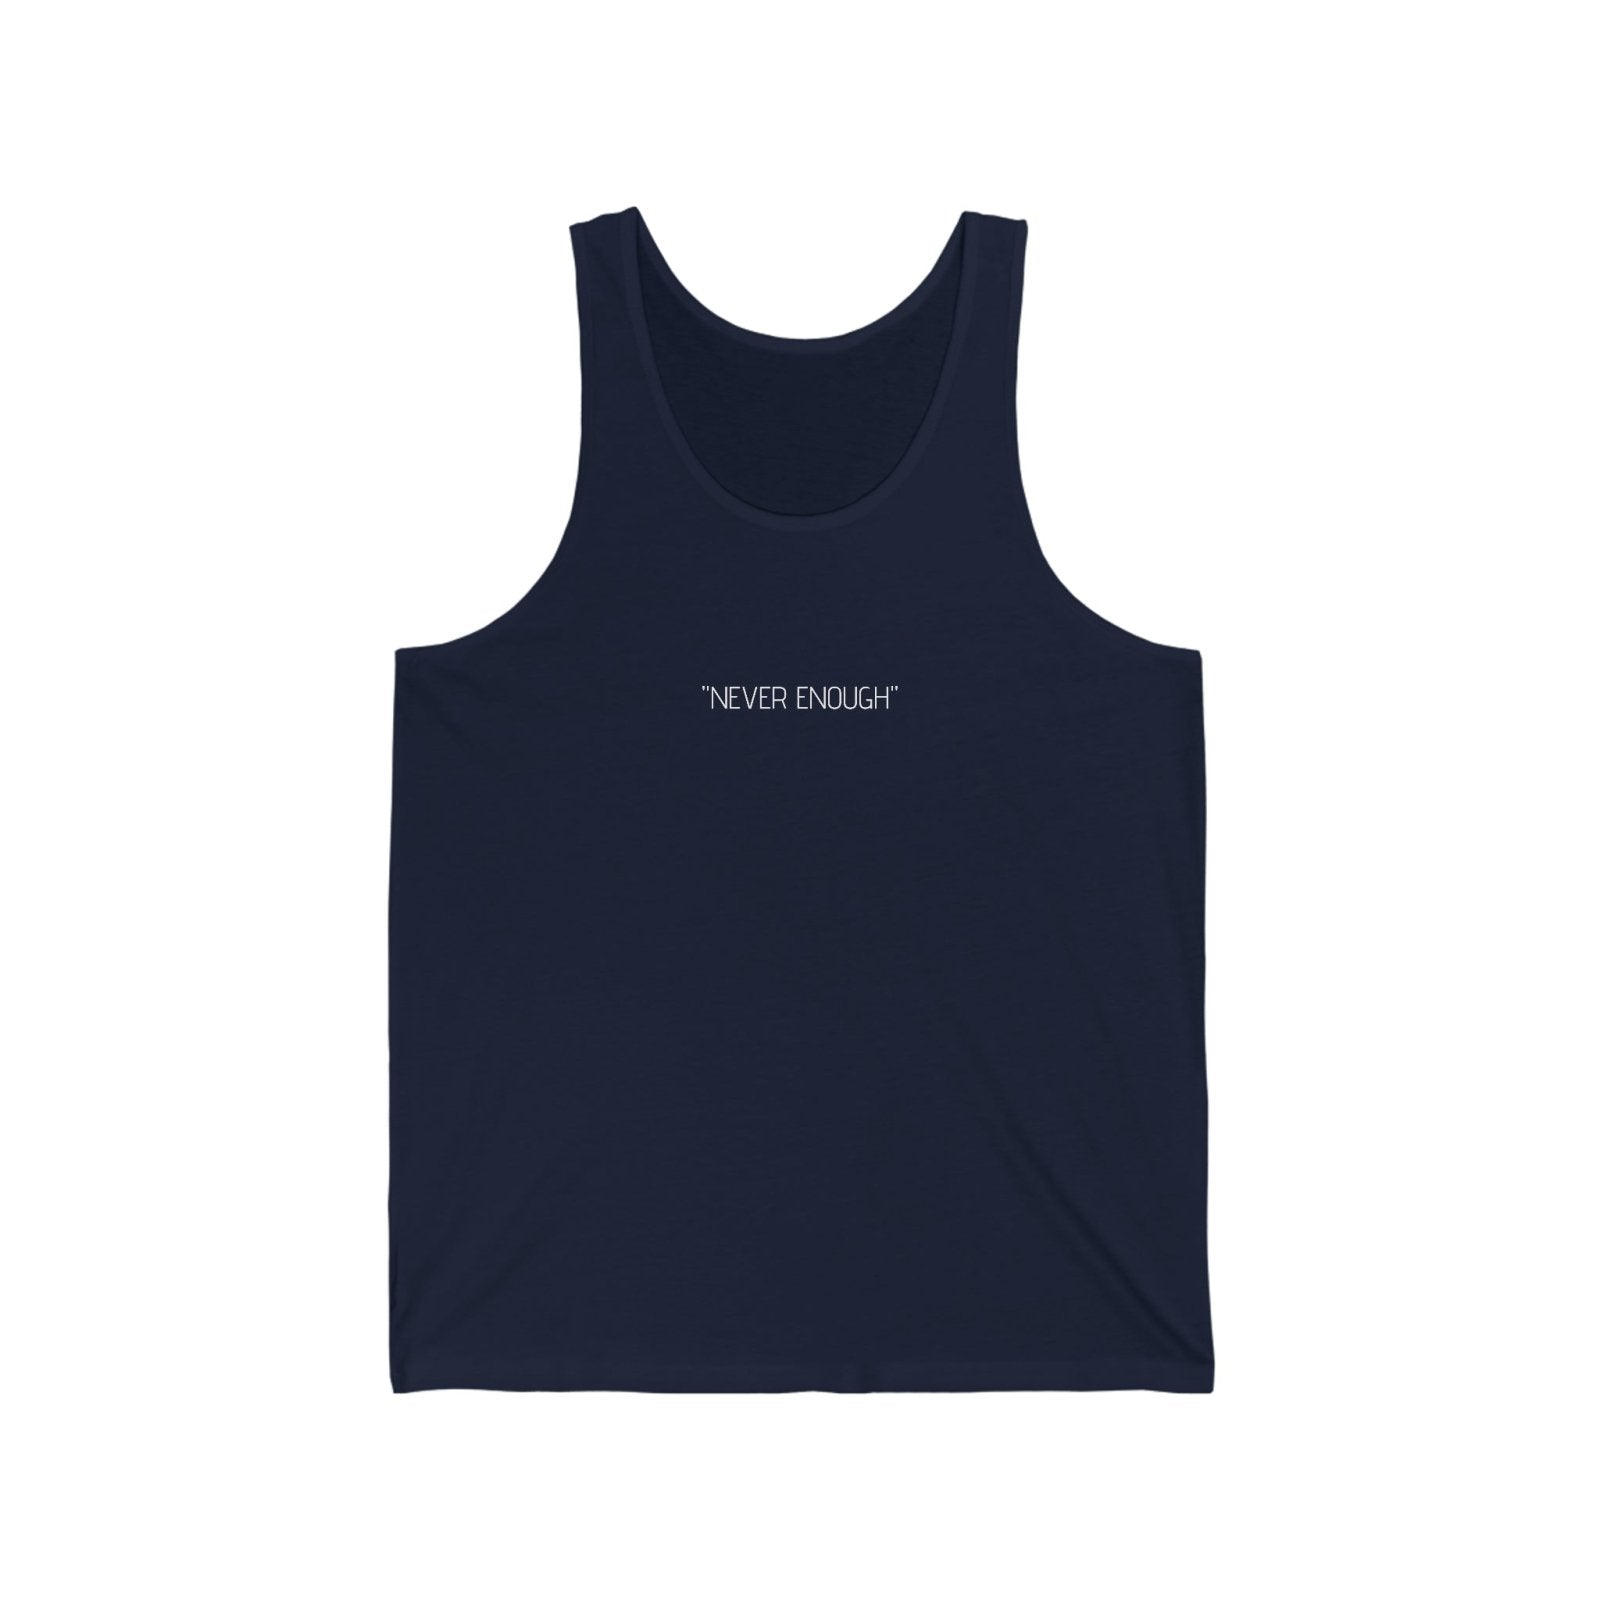 "NEVER ENOUGH" Motivational Jersey Tank - Dowding